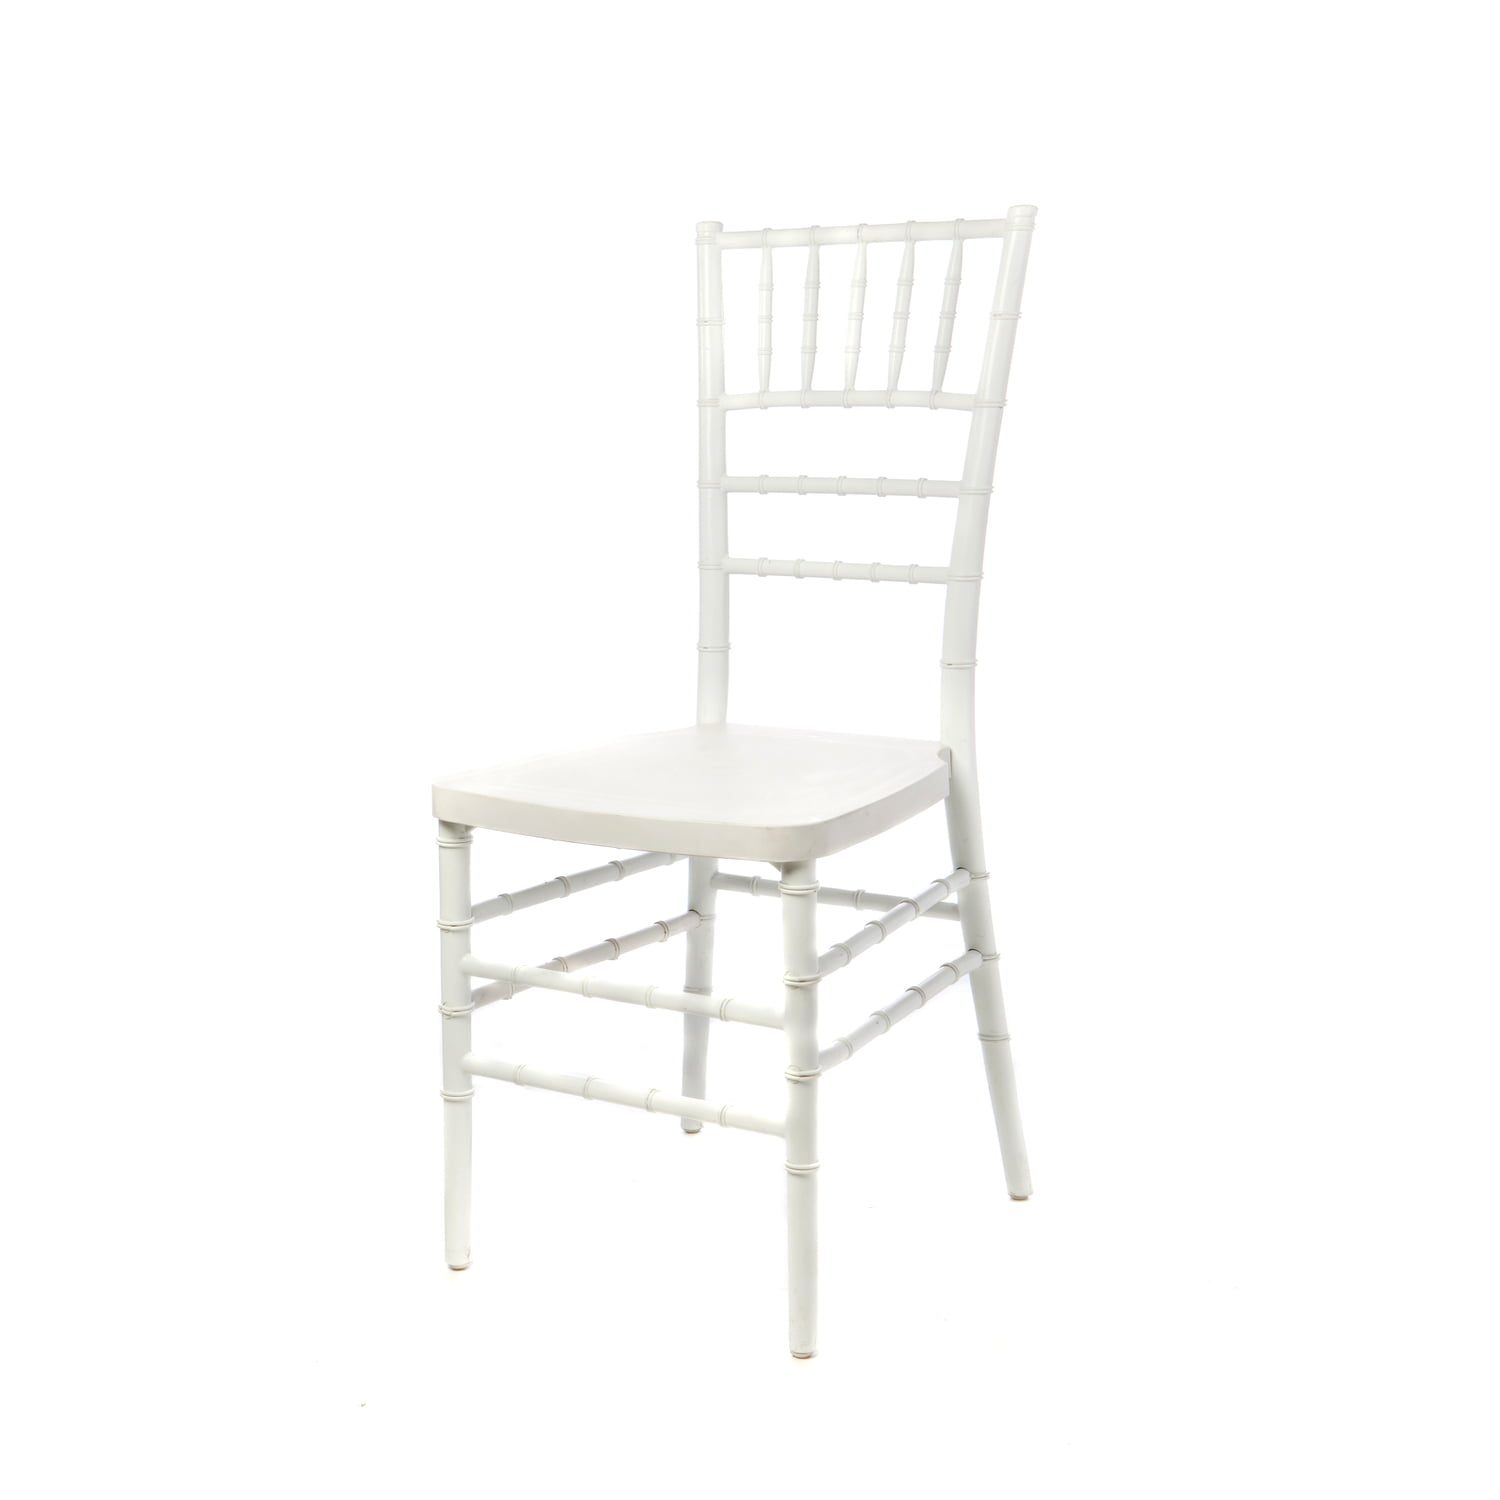 Rb-700k-wh-web2 Max Resin White Crystal Chiavari Chair, Set Of 2 - 36 X 16 X 15.3 In.